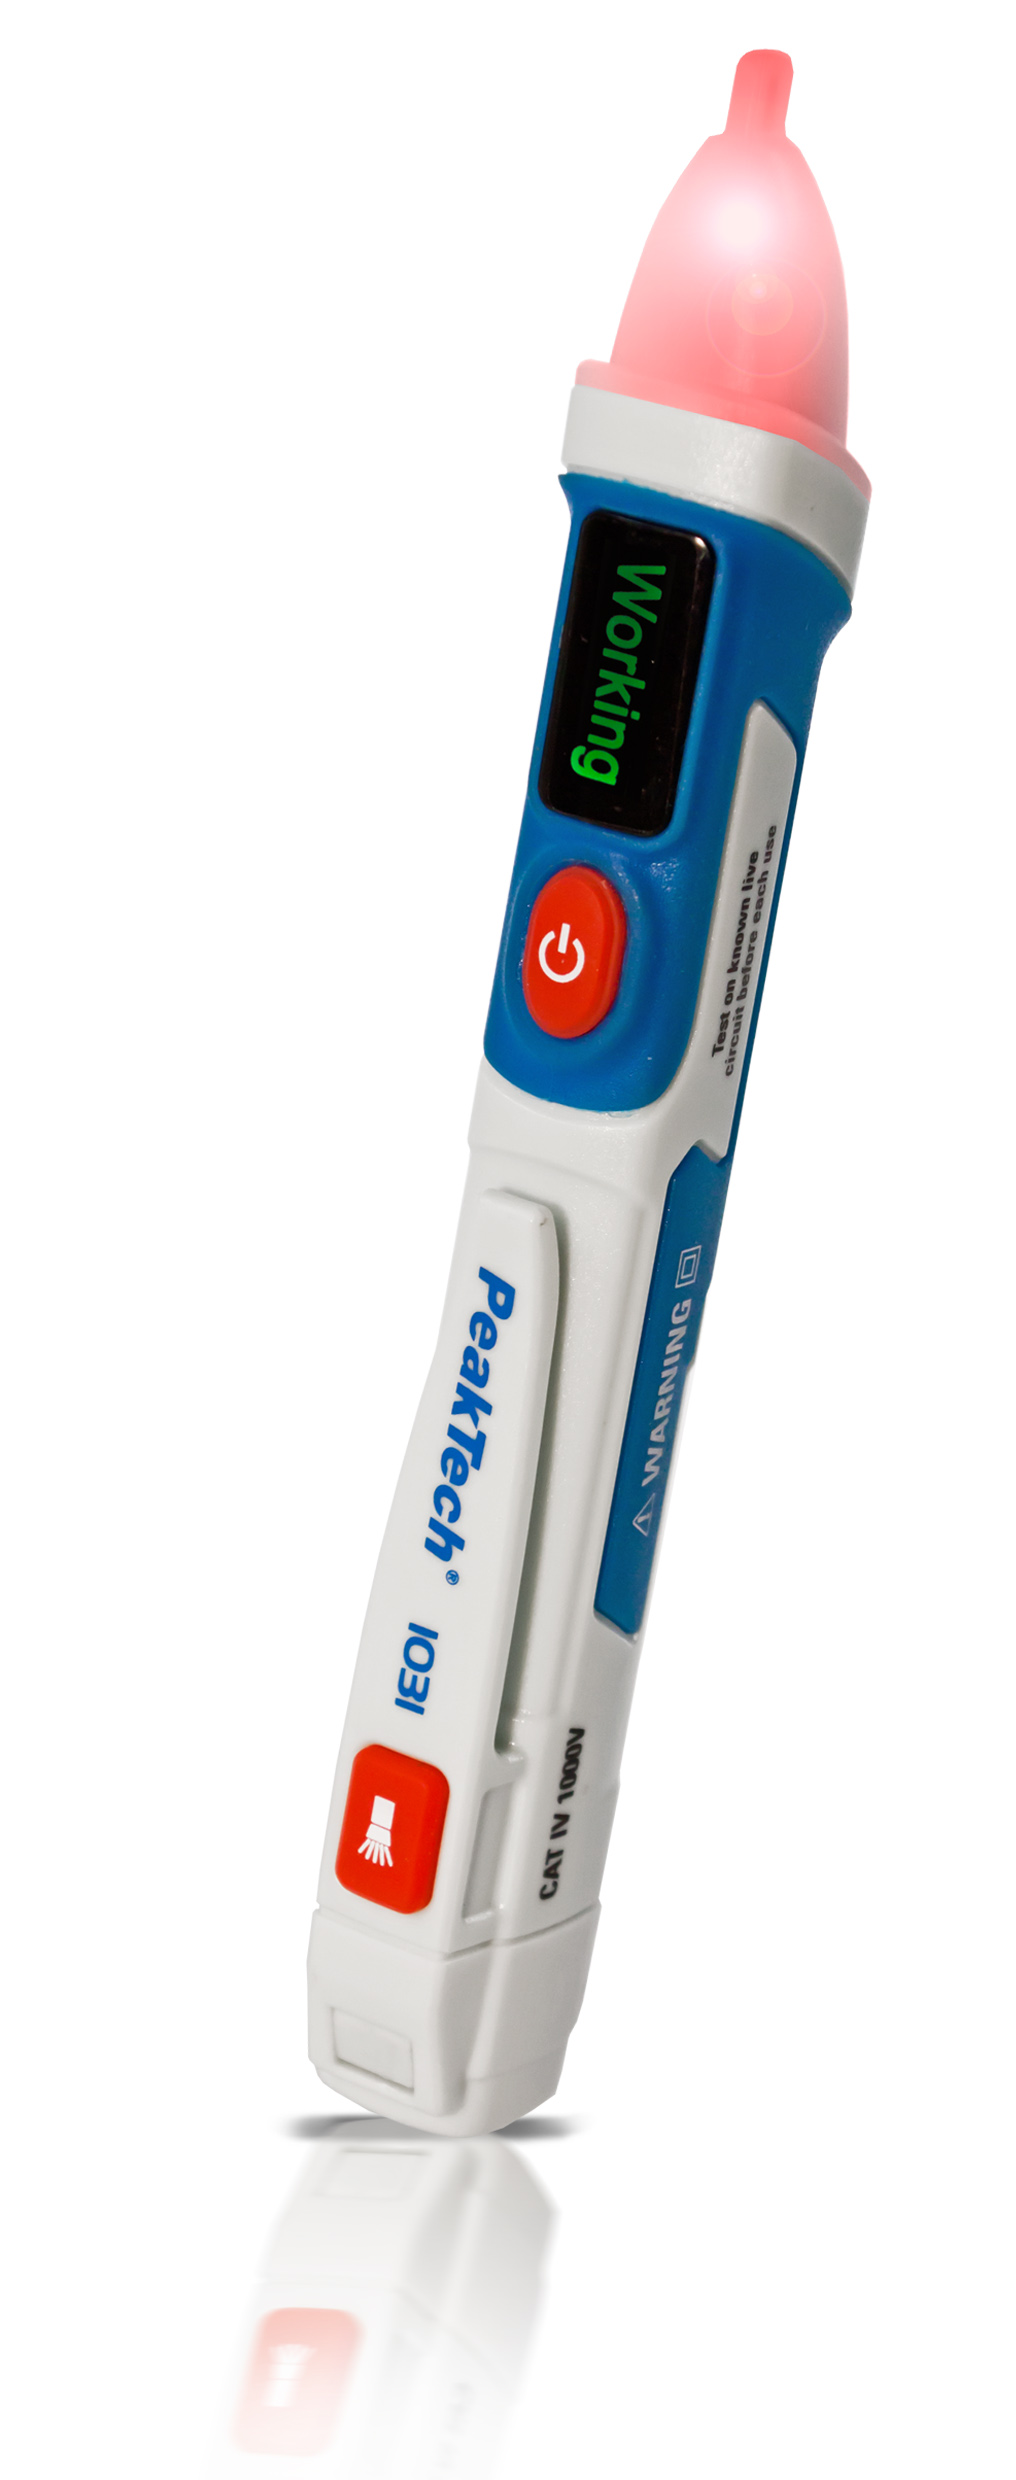 «PeakTech® P 1031» AC voltage tester 50 - 1000 V AC with vibration